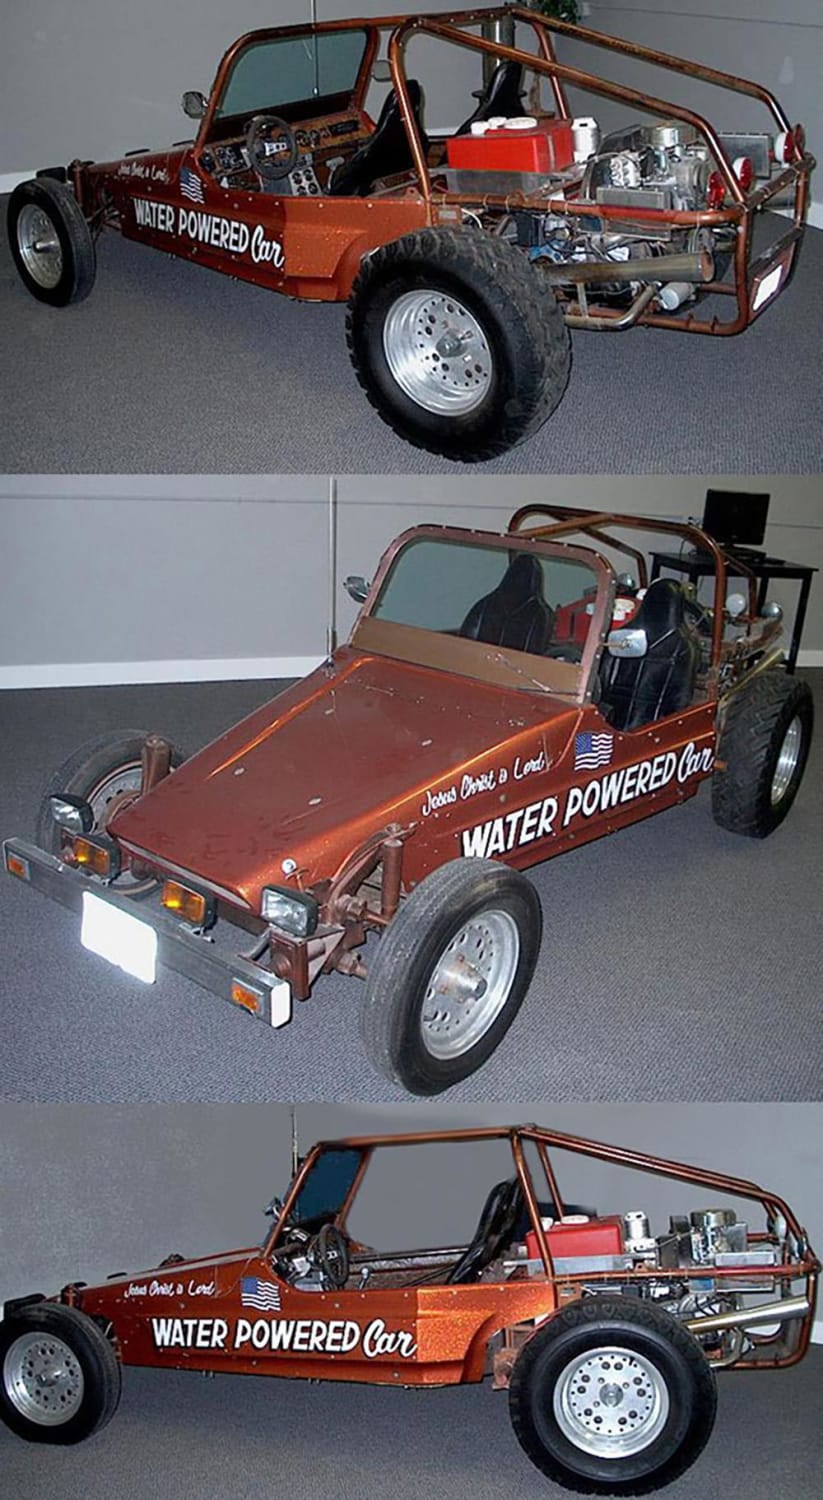 Stanley Meyer's "Water Powered Car" - The car was said to be powered by a revolutionary water fuel cell. In 1996, an Ohio court ruled the project as fraudulent. Meyer mysteriously died two years later in 1998.